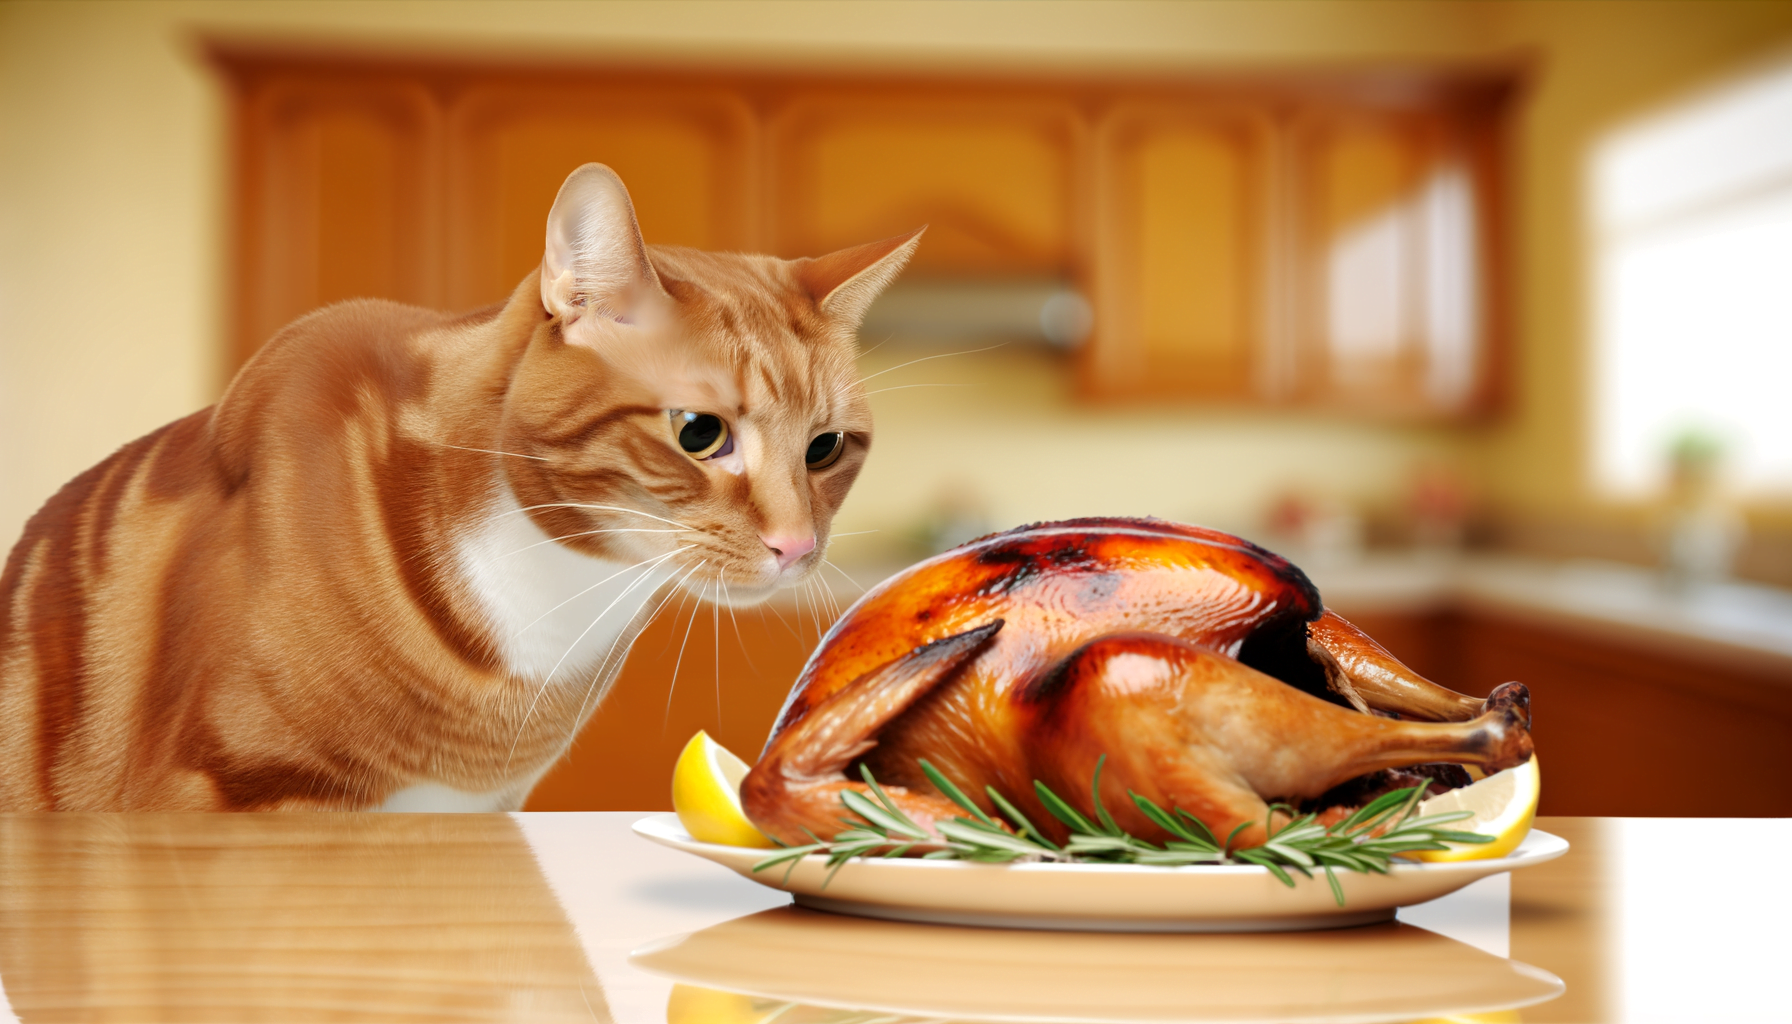 "Unraveling the Mystery: Can Cats Safely Feast on Turkey?"